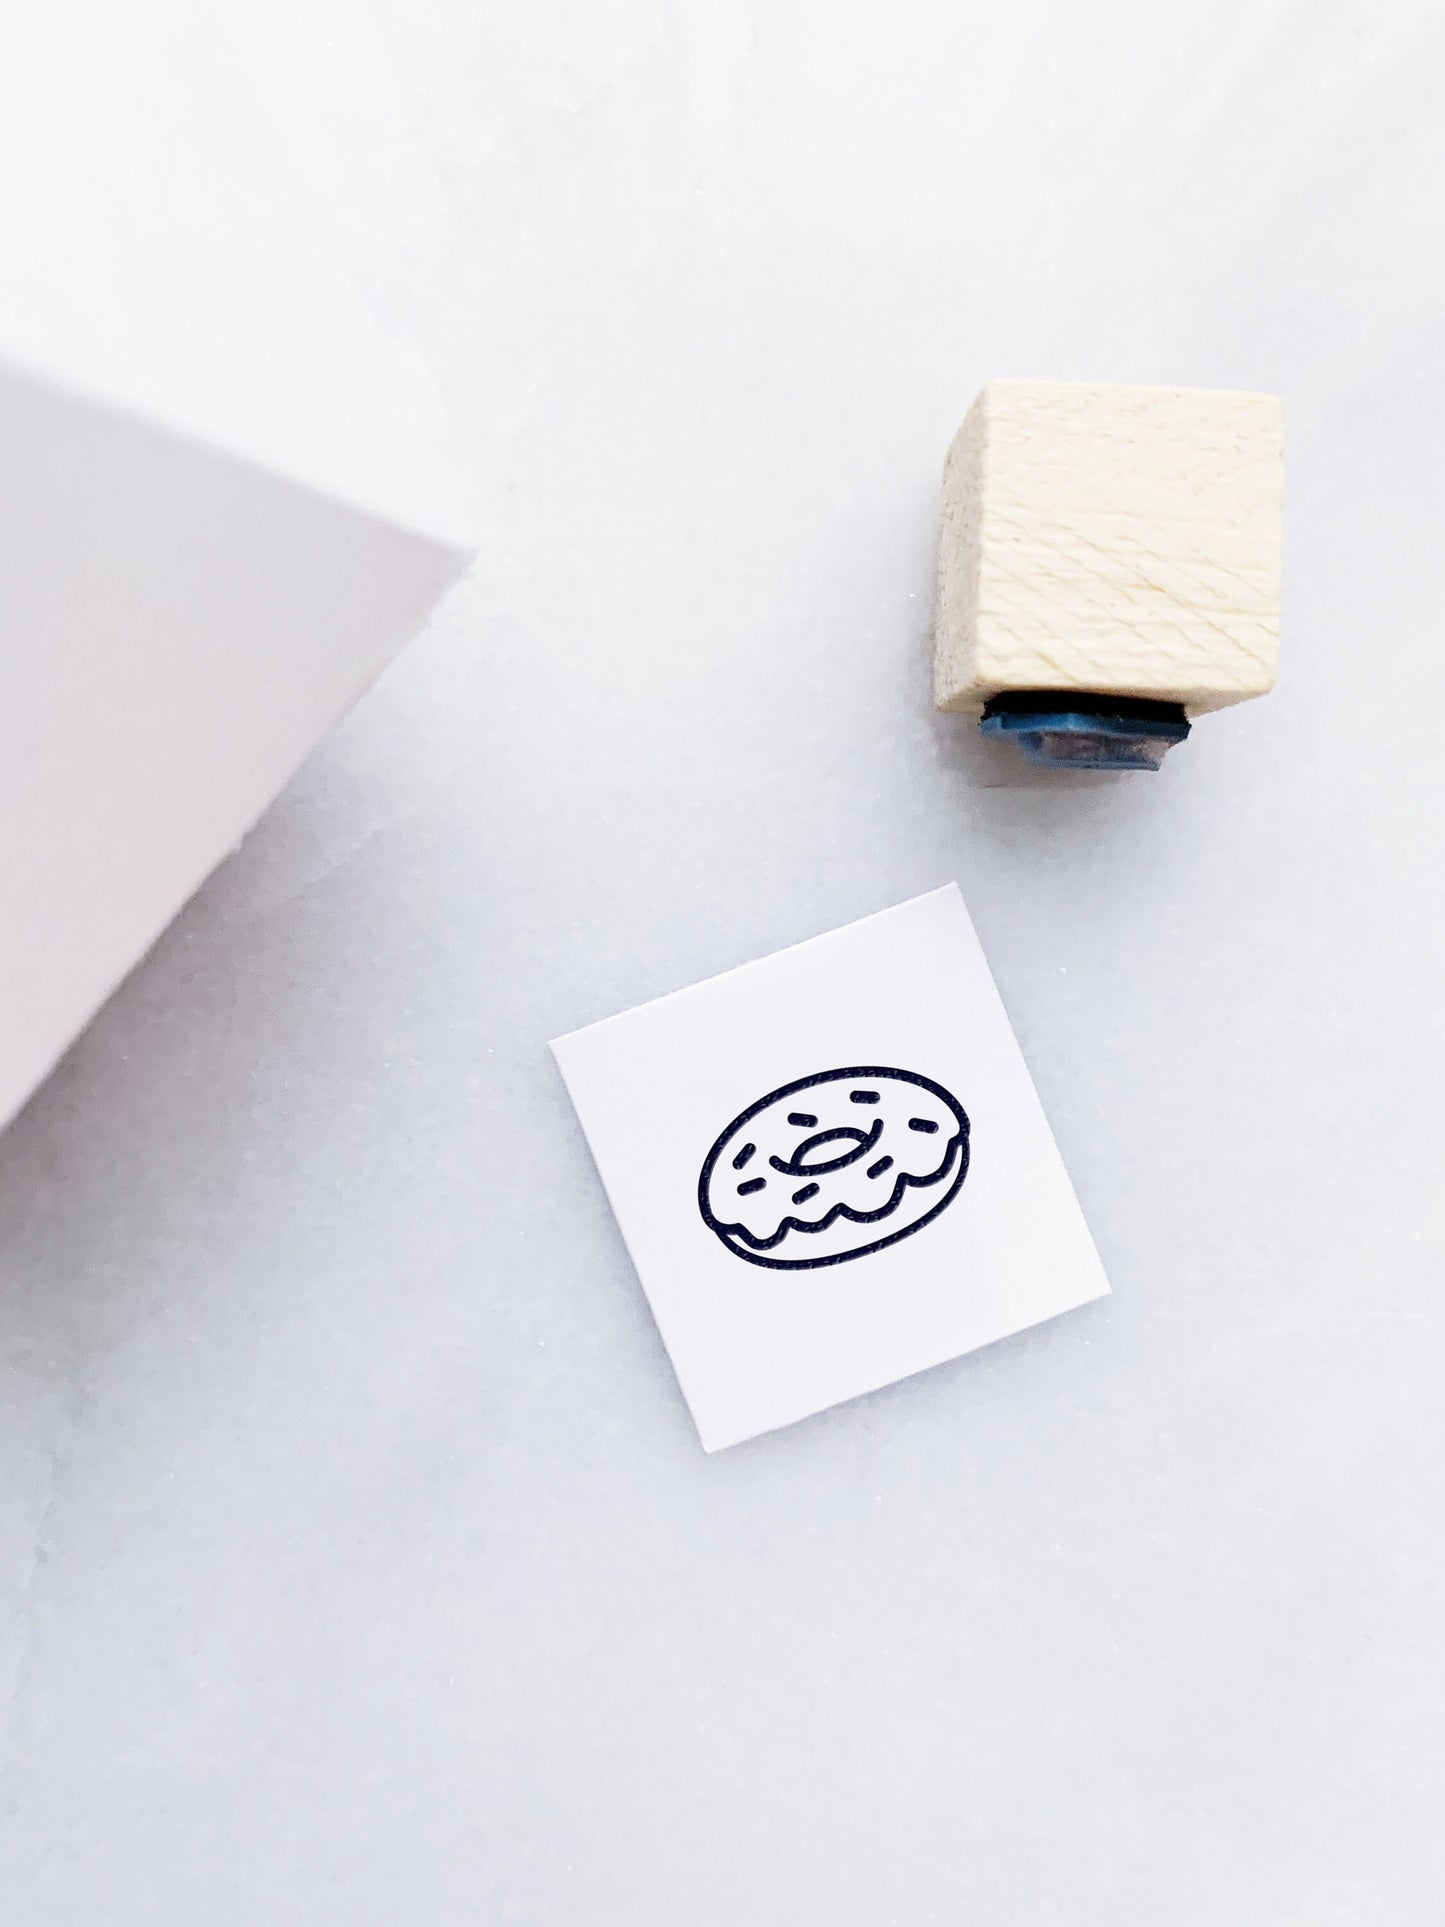 Donut Rubber Stamp